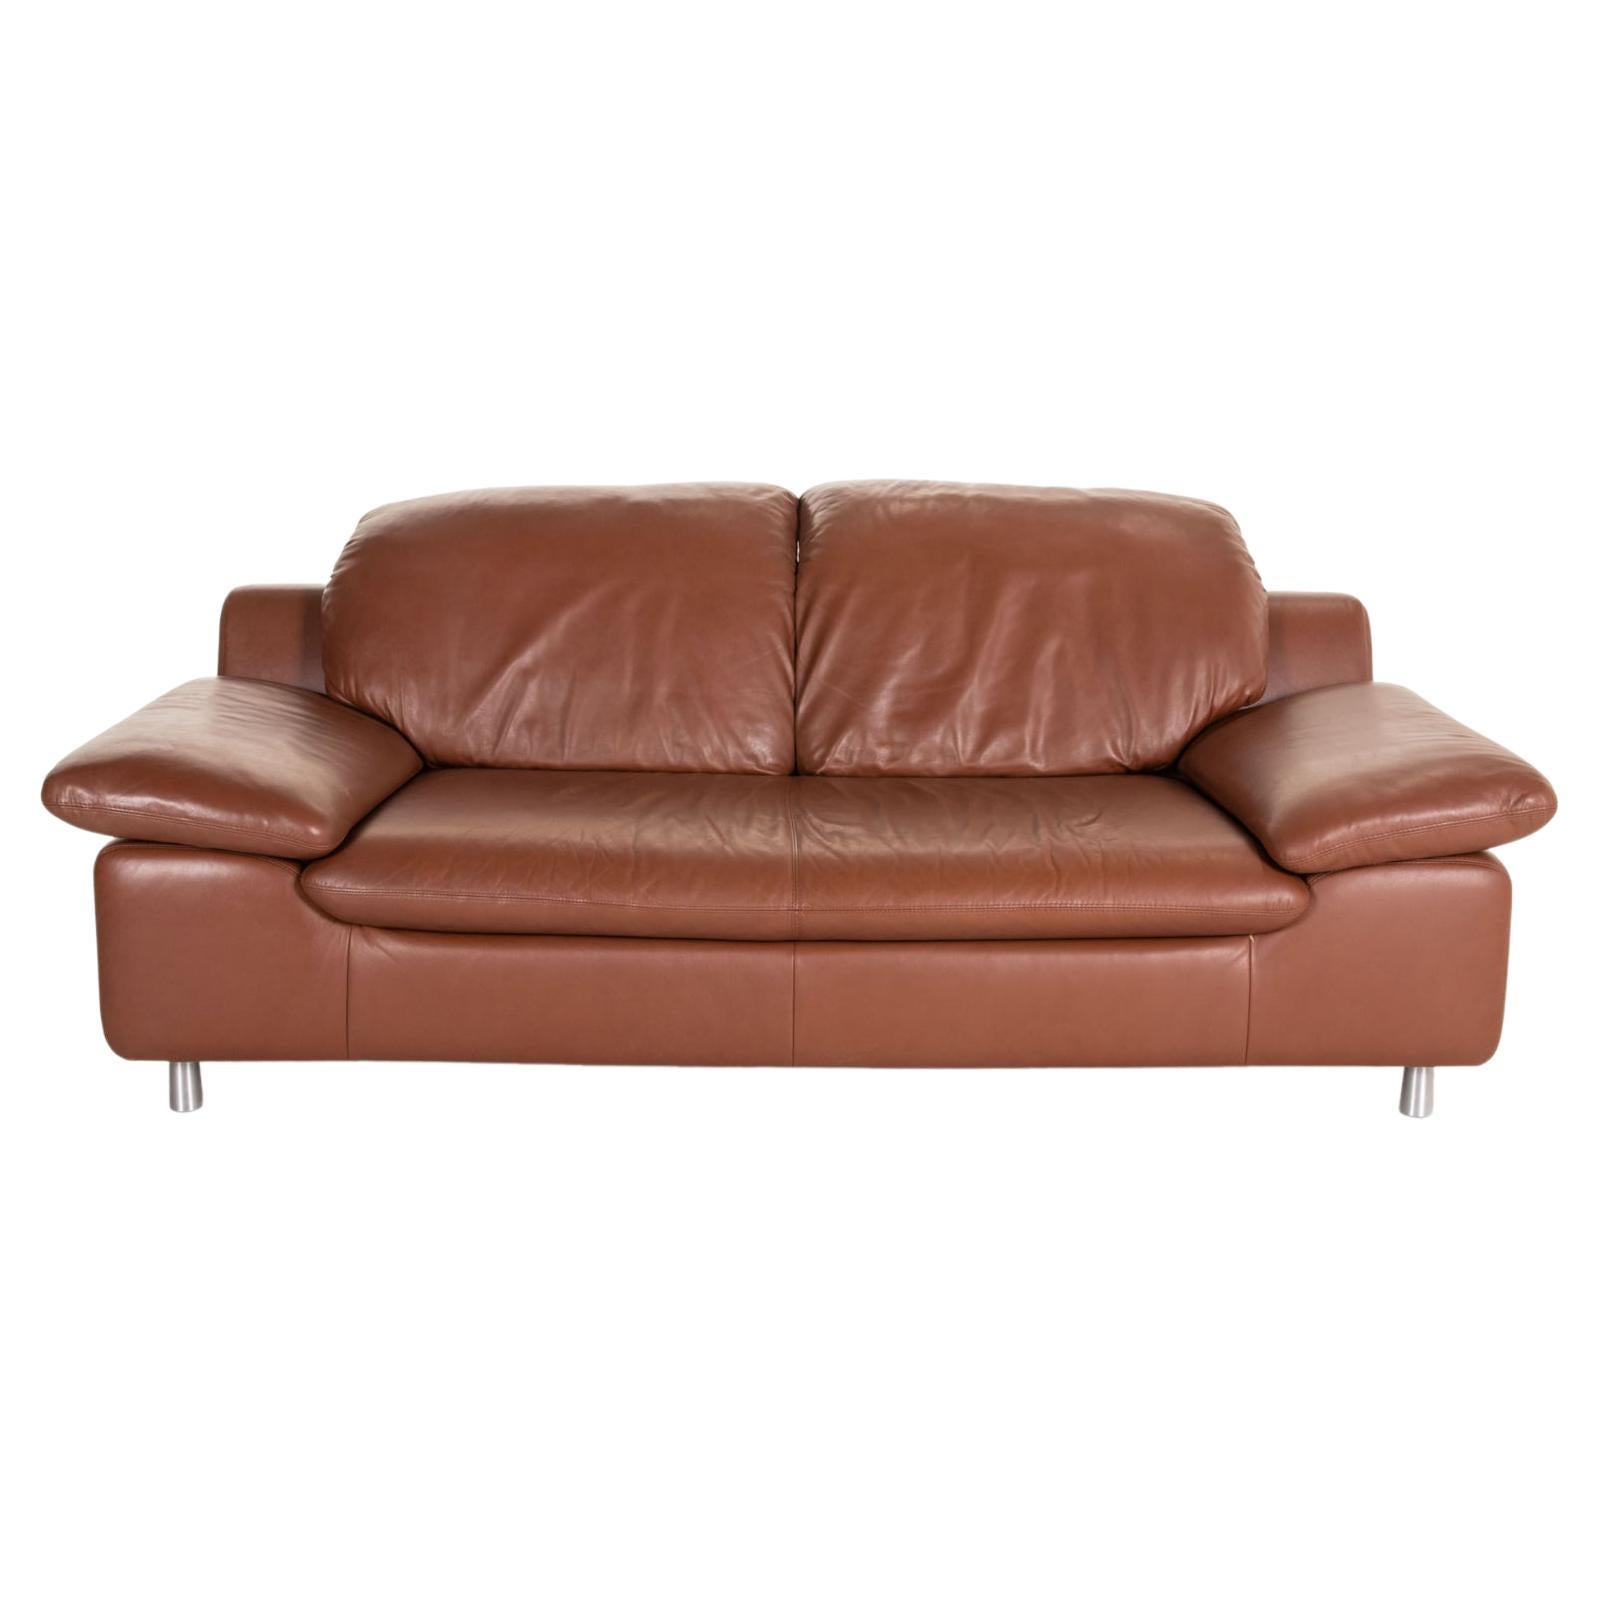 Ewald Schillig Leather Sofa Brown Two-Seater Couch For Sale